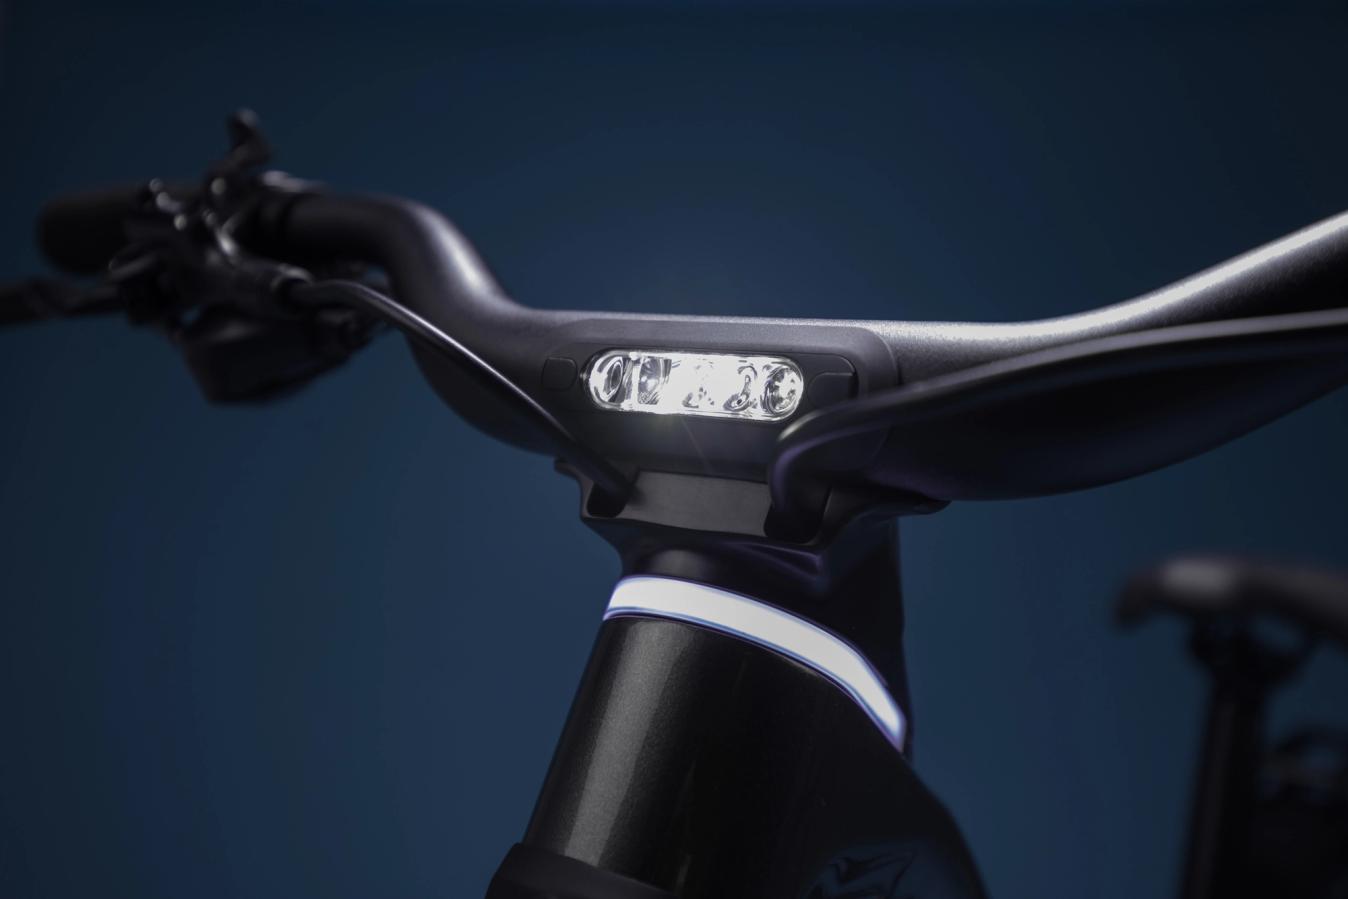 The Diem features integrated front and rear lights that are powered by the e-bikes battery 